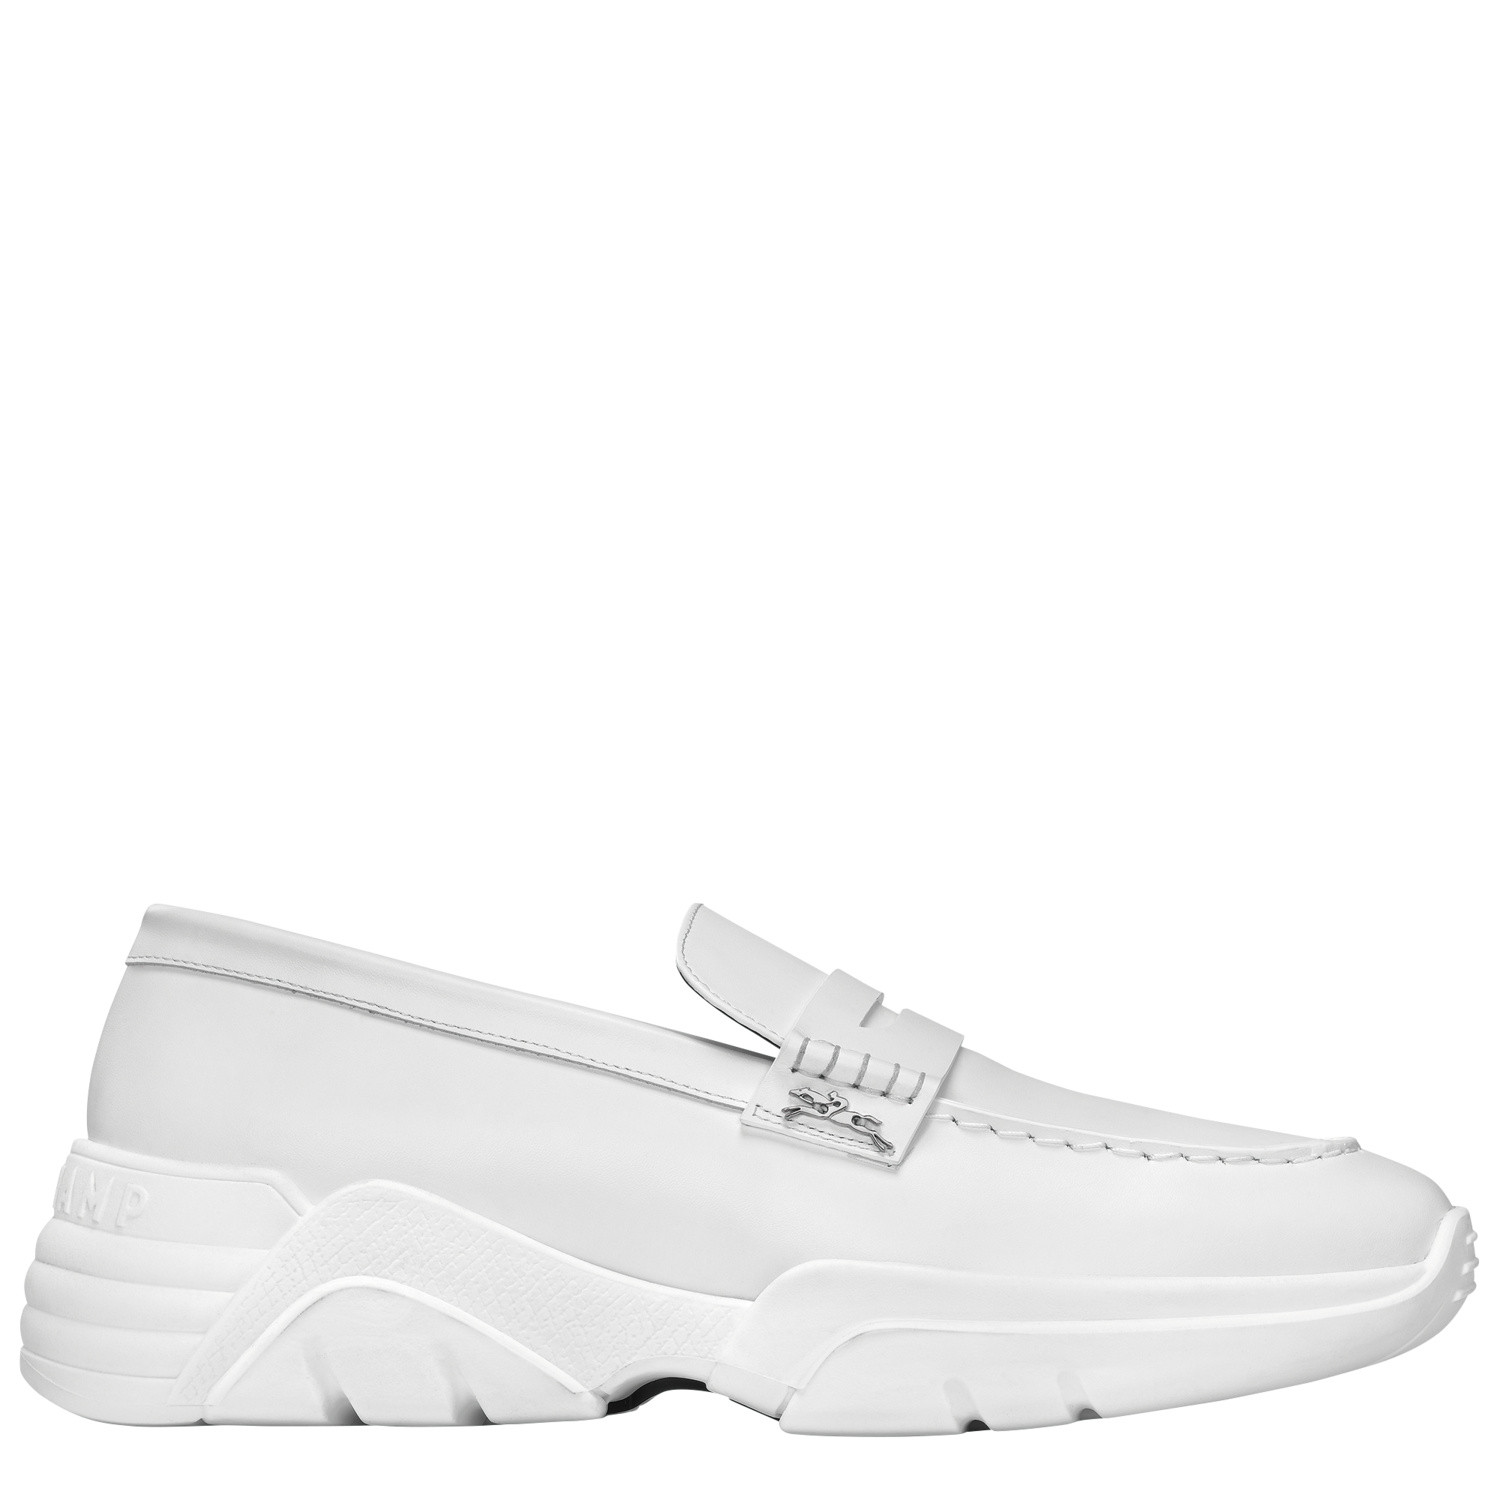 Longchamp Loafer Au Sultan In White